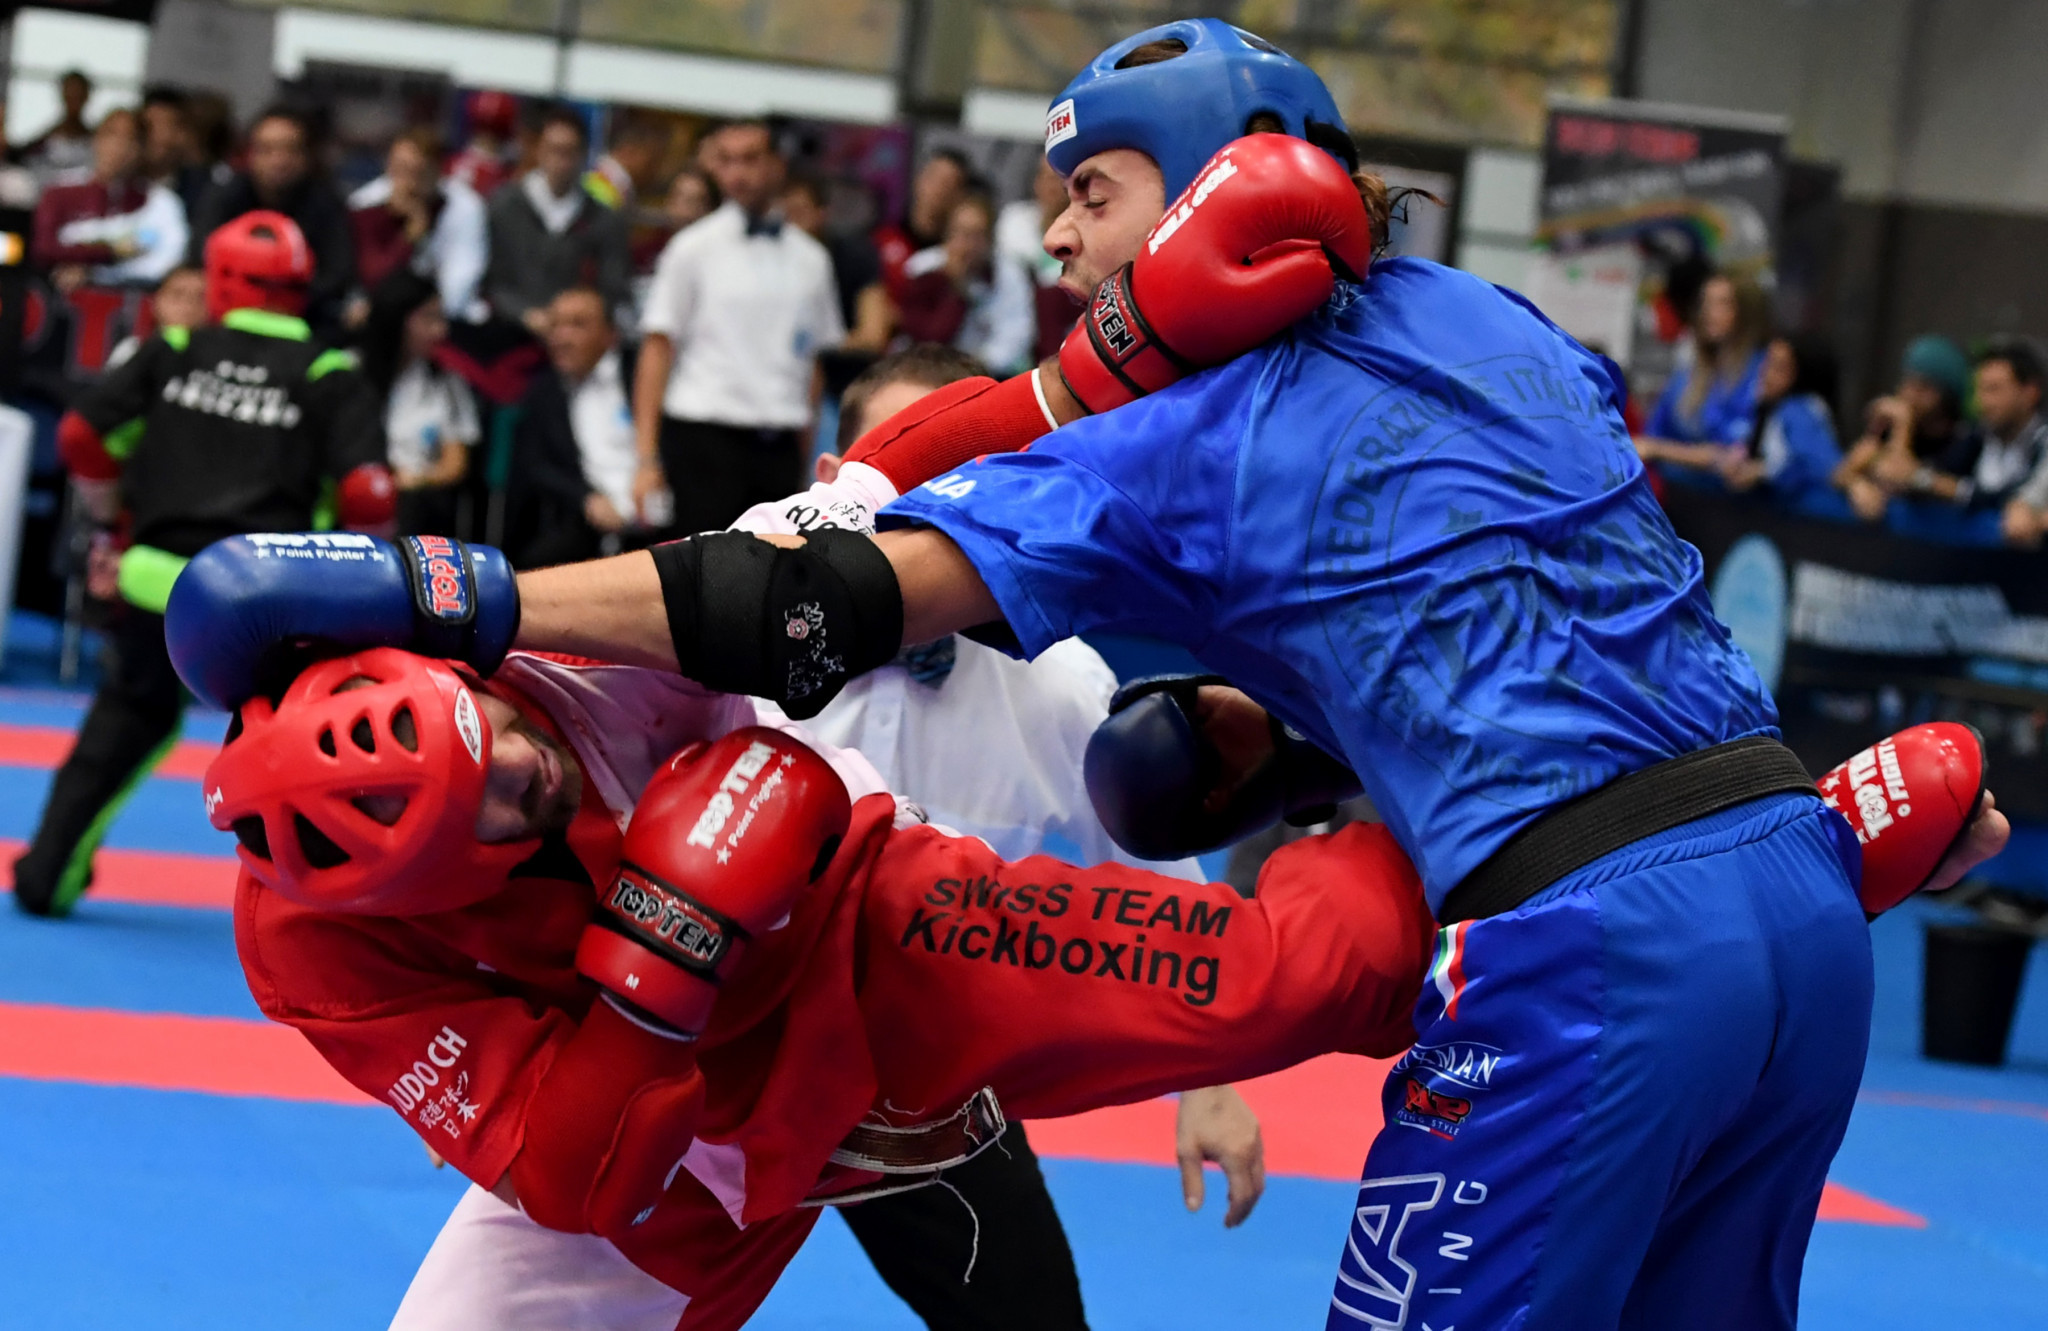 Kickboxing missed out on LA 2028 with breaking, karate and motorsport ©Getty Images